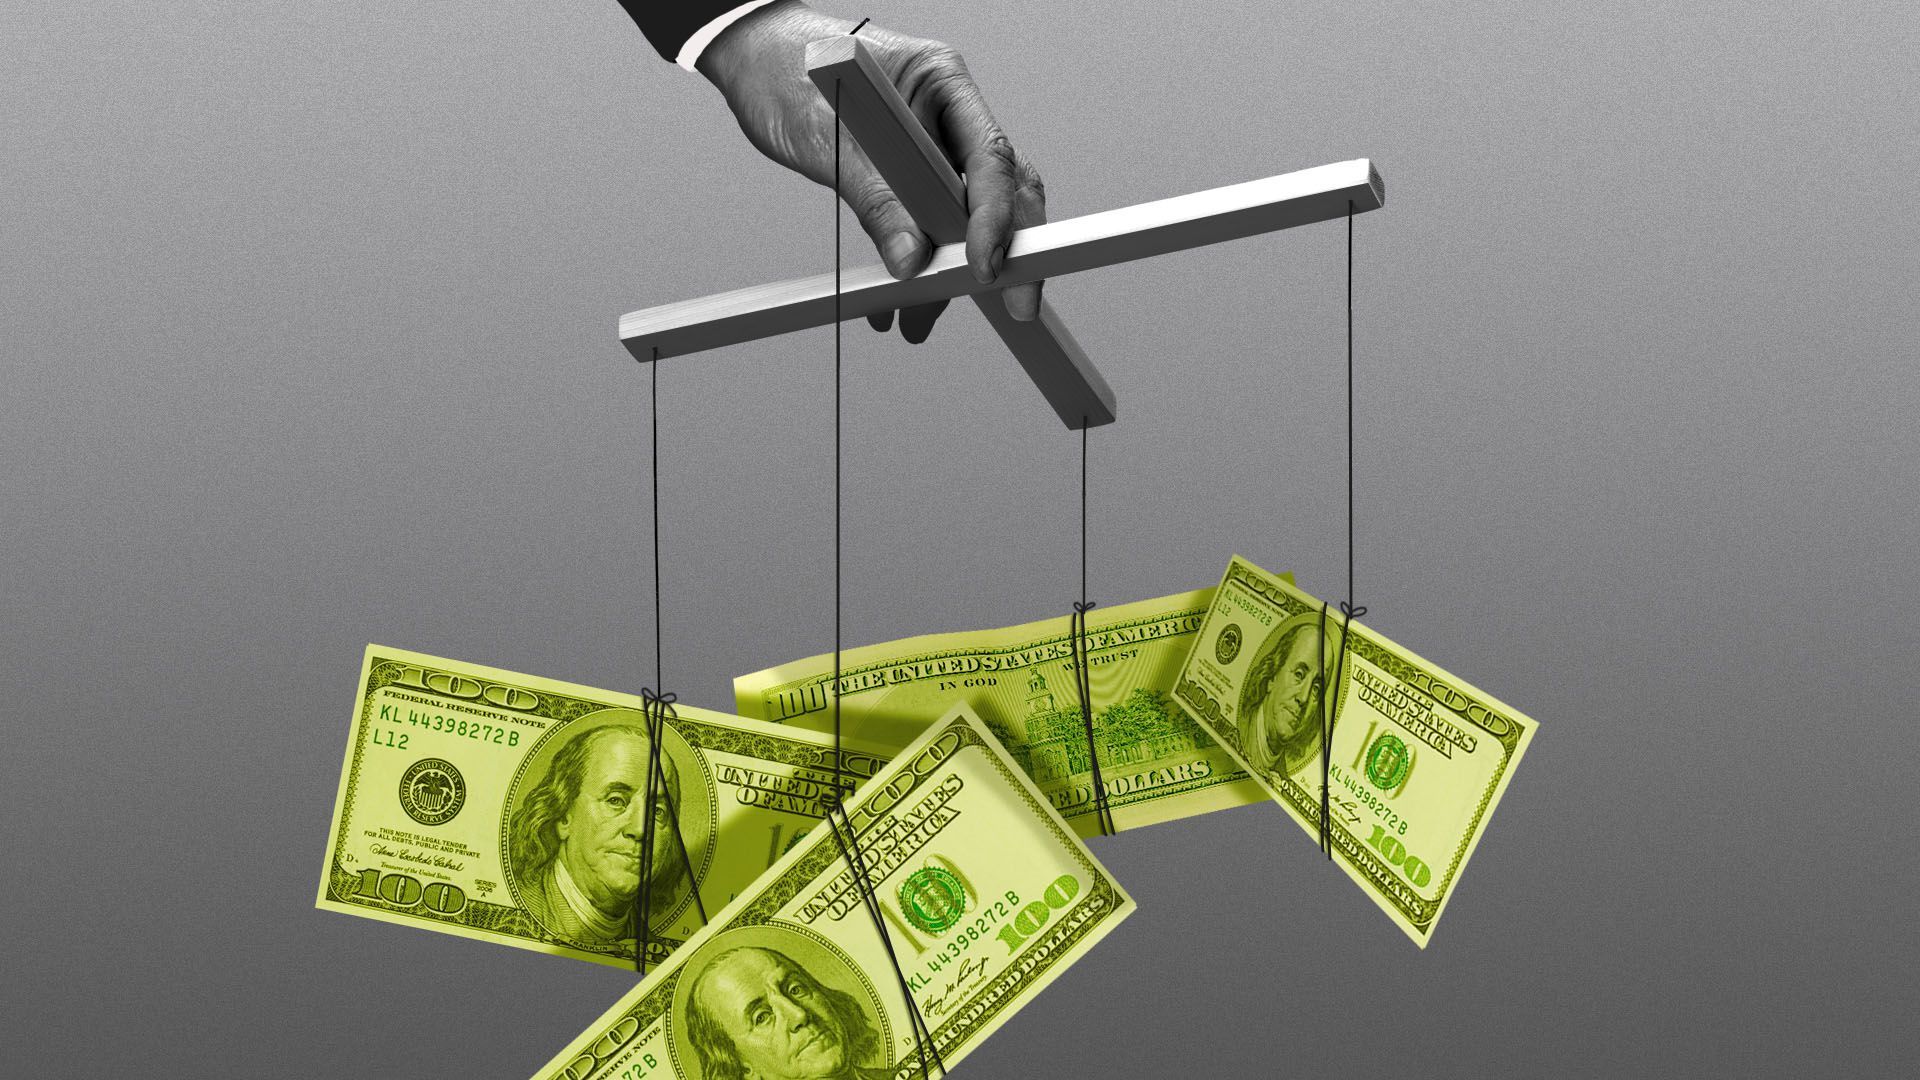 Illustration of a hand holding a marionette bar with hundred dollar bills attached to the strings